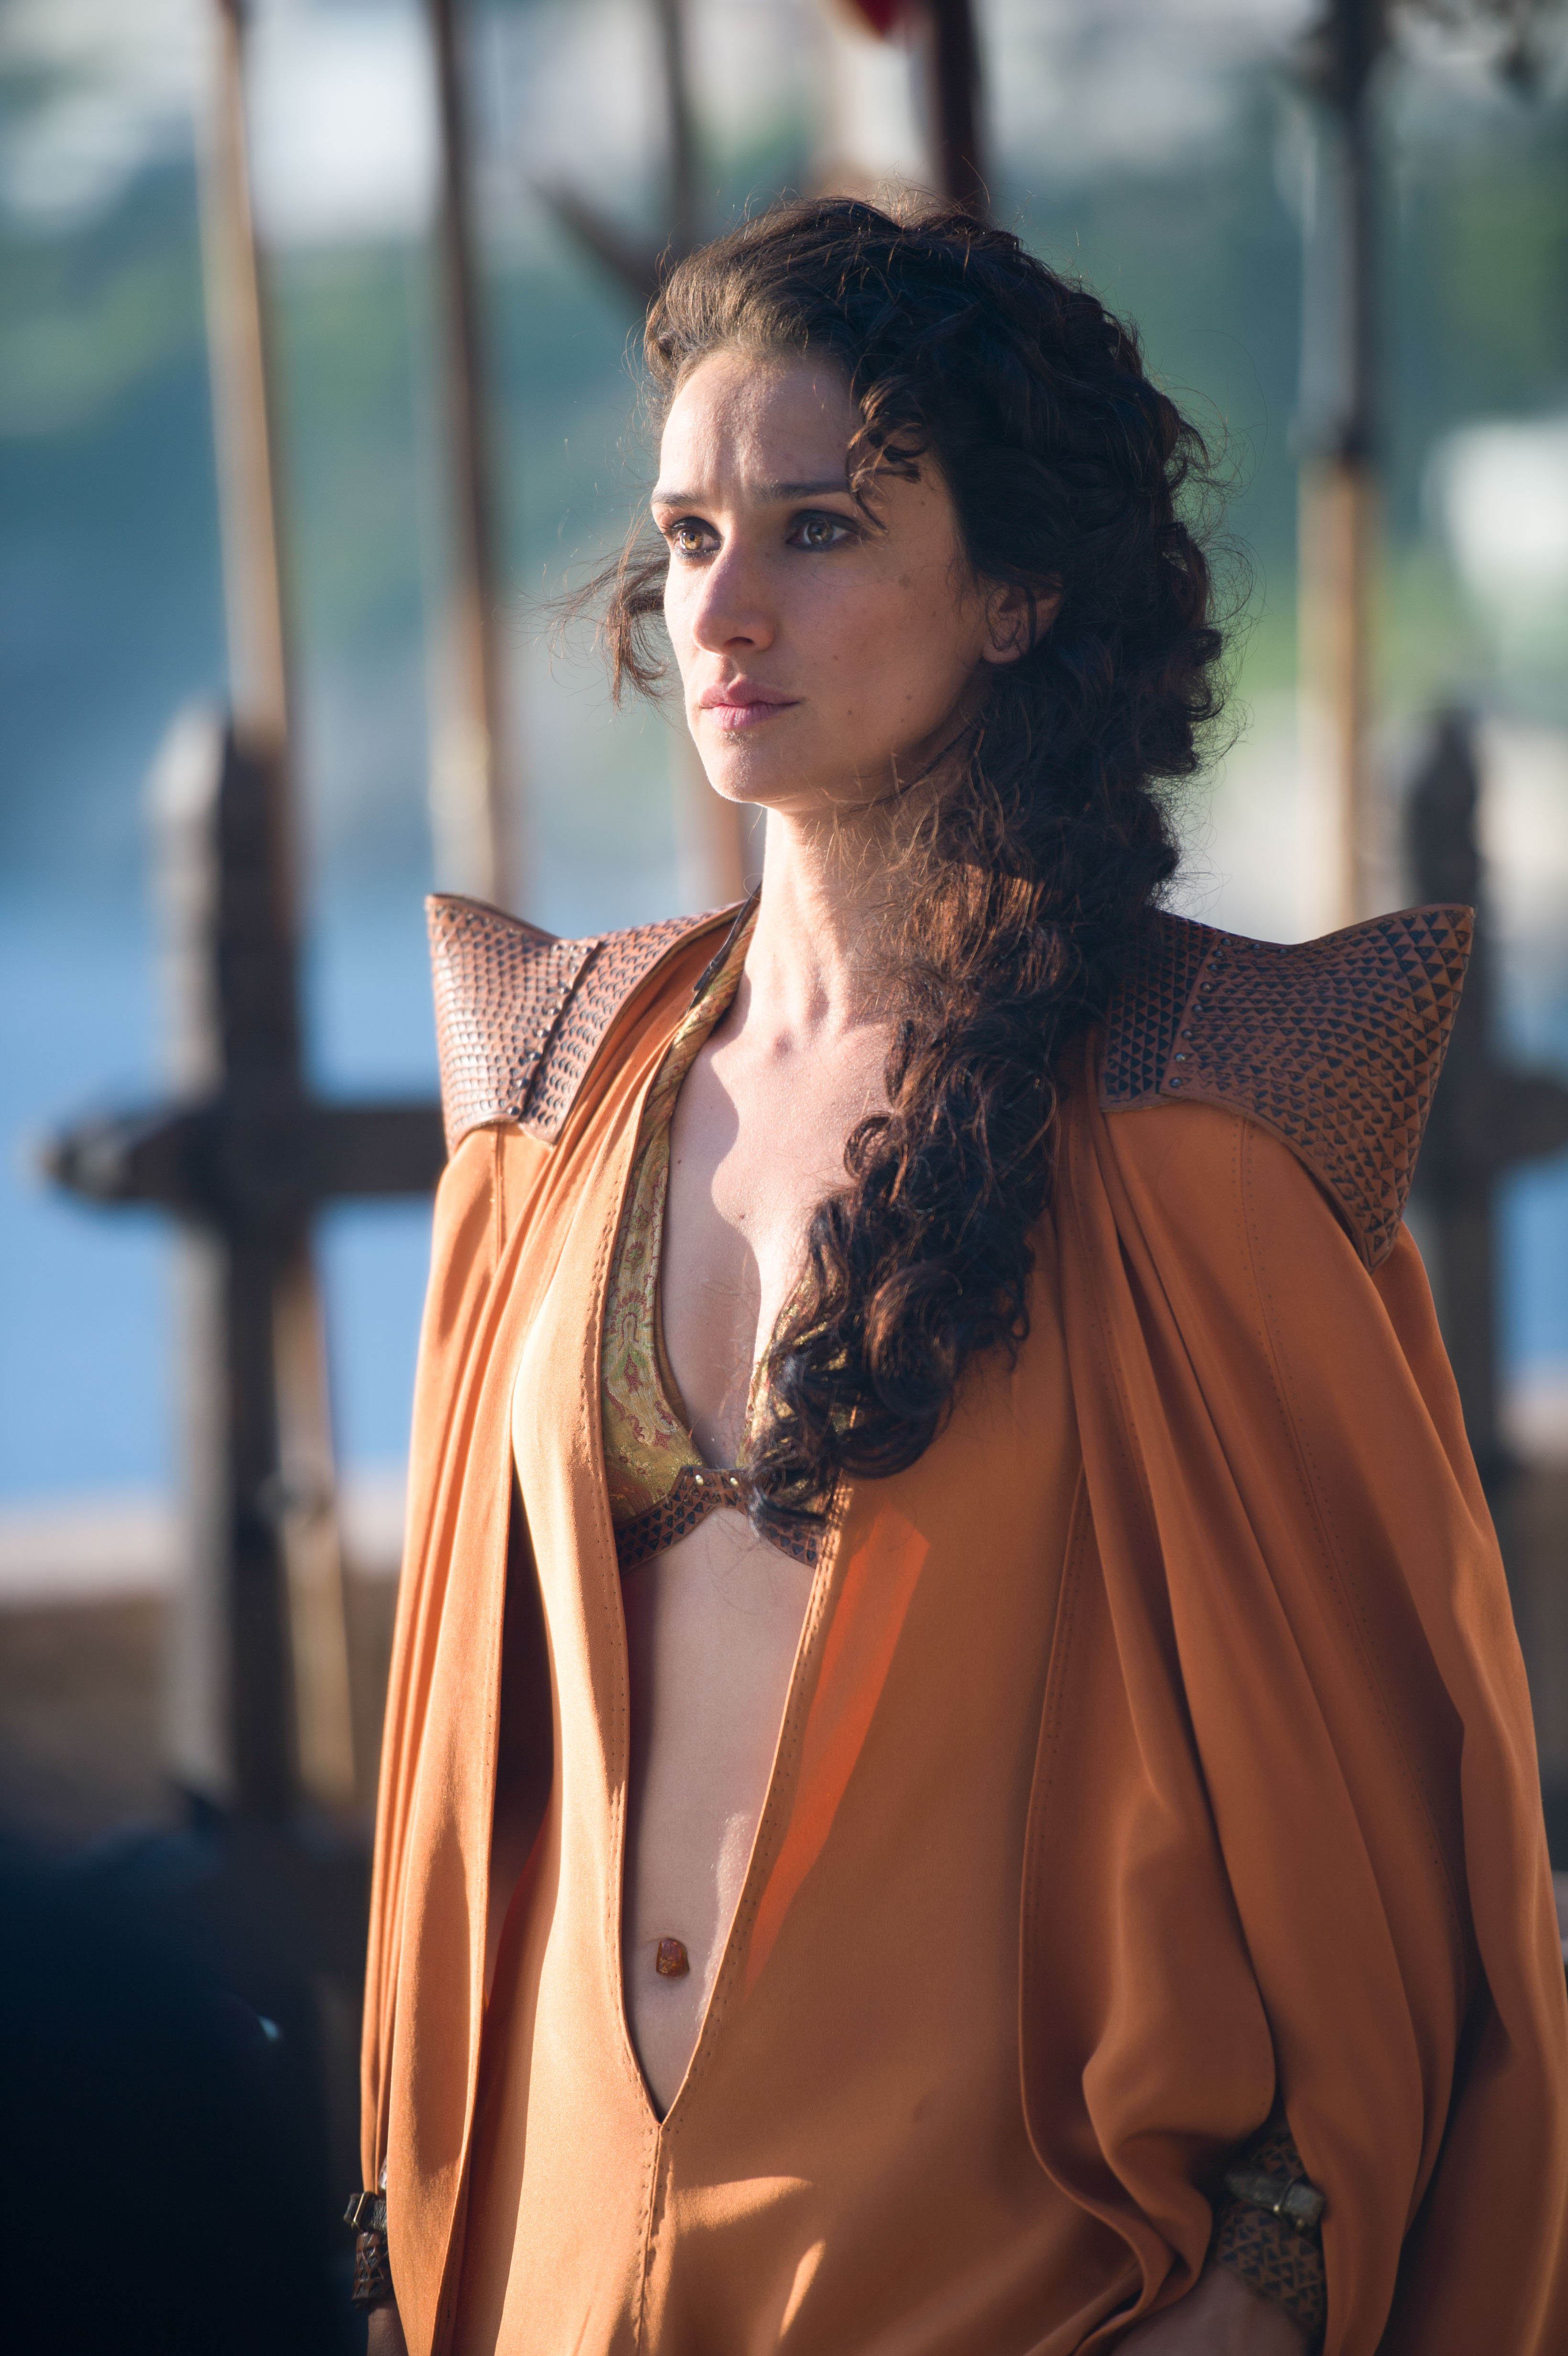 Game of Thrones \u2013 32 New Stills From Season 4 Episode 8 \u201cThe Mountain and The Viper\u201d  We Geek Girls